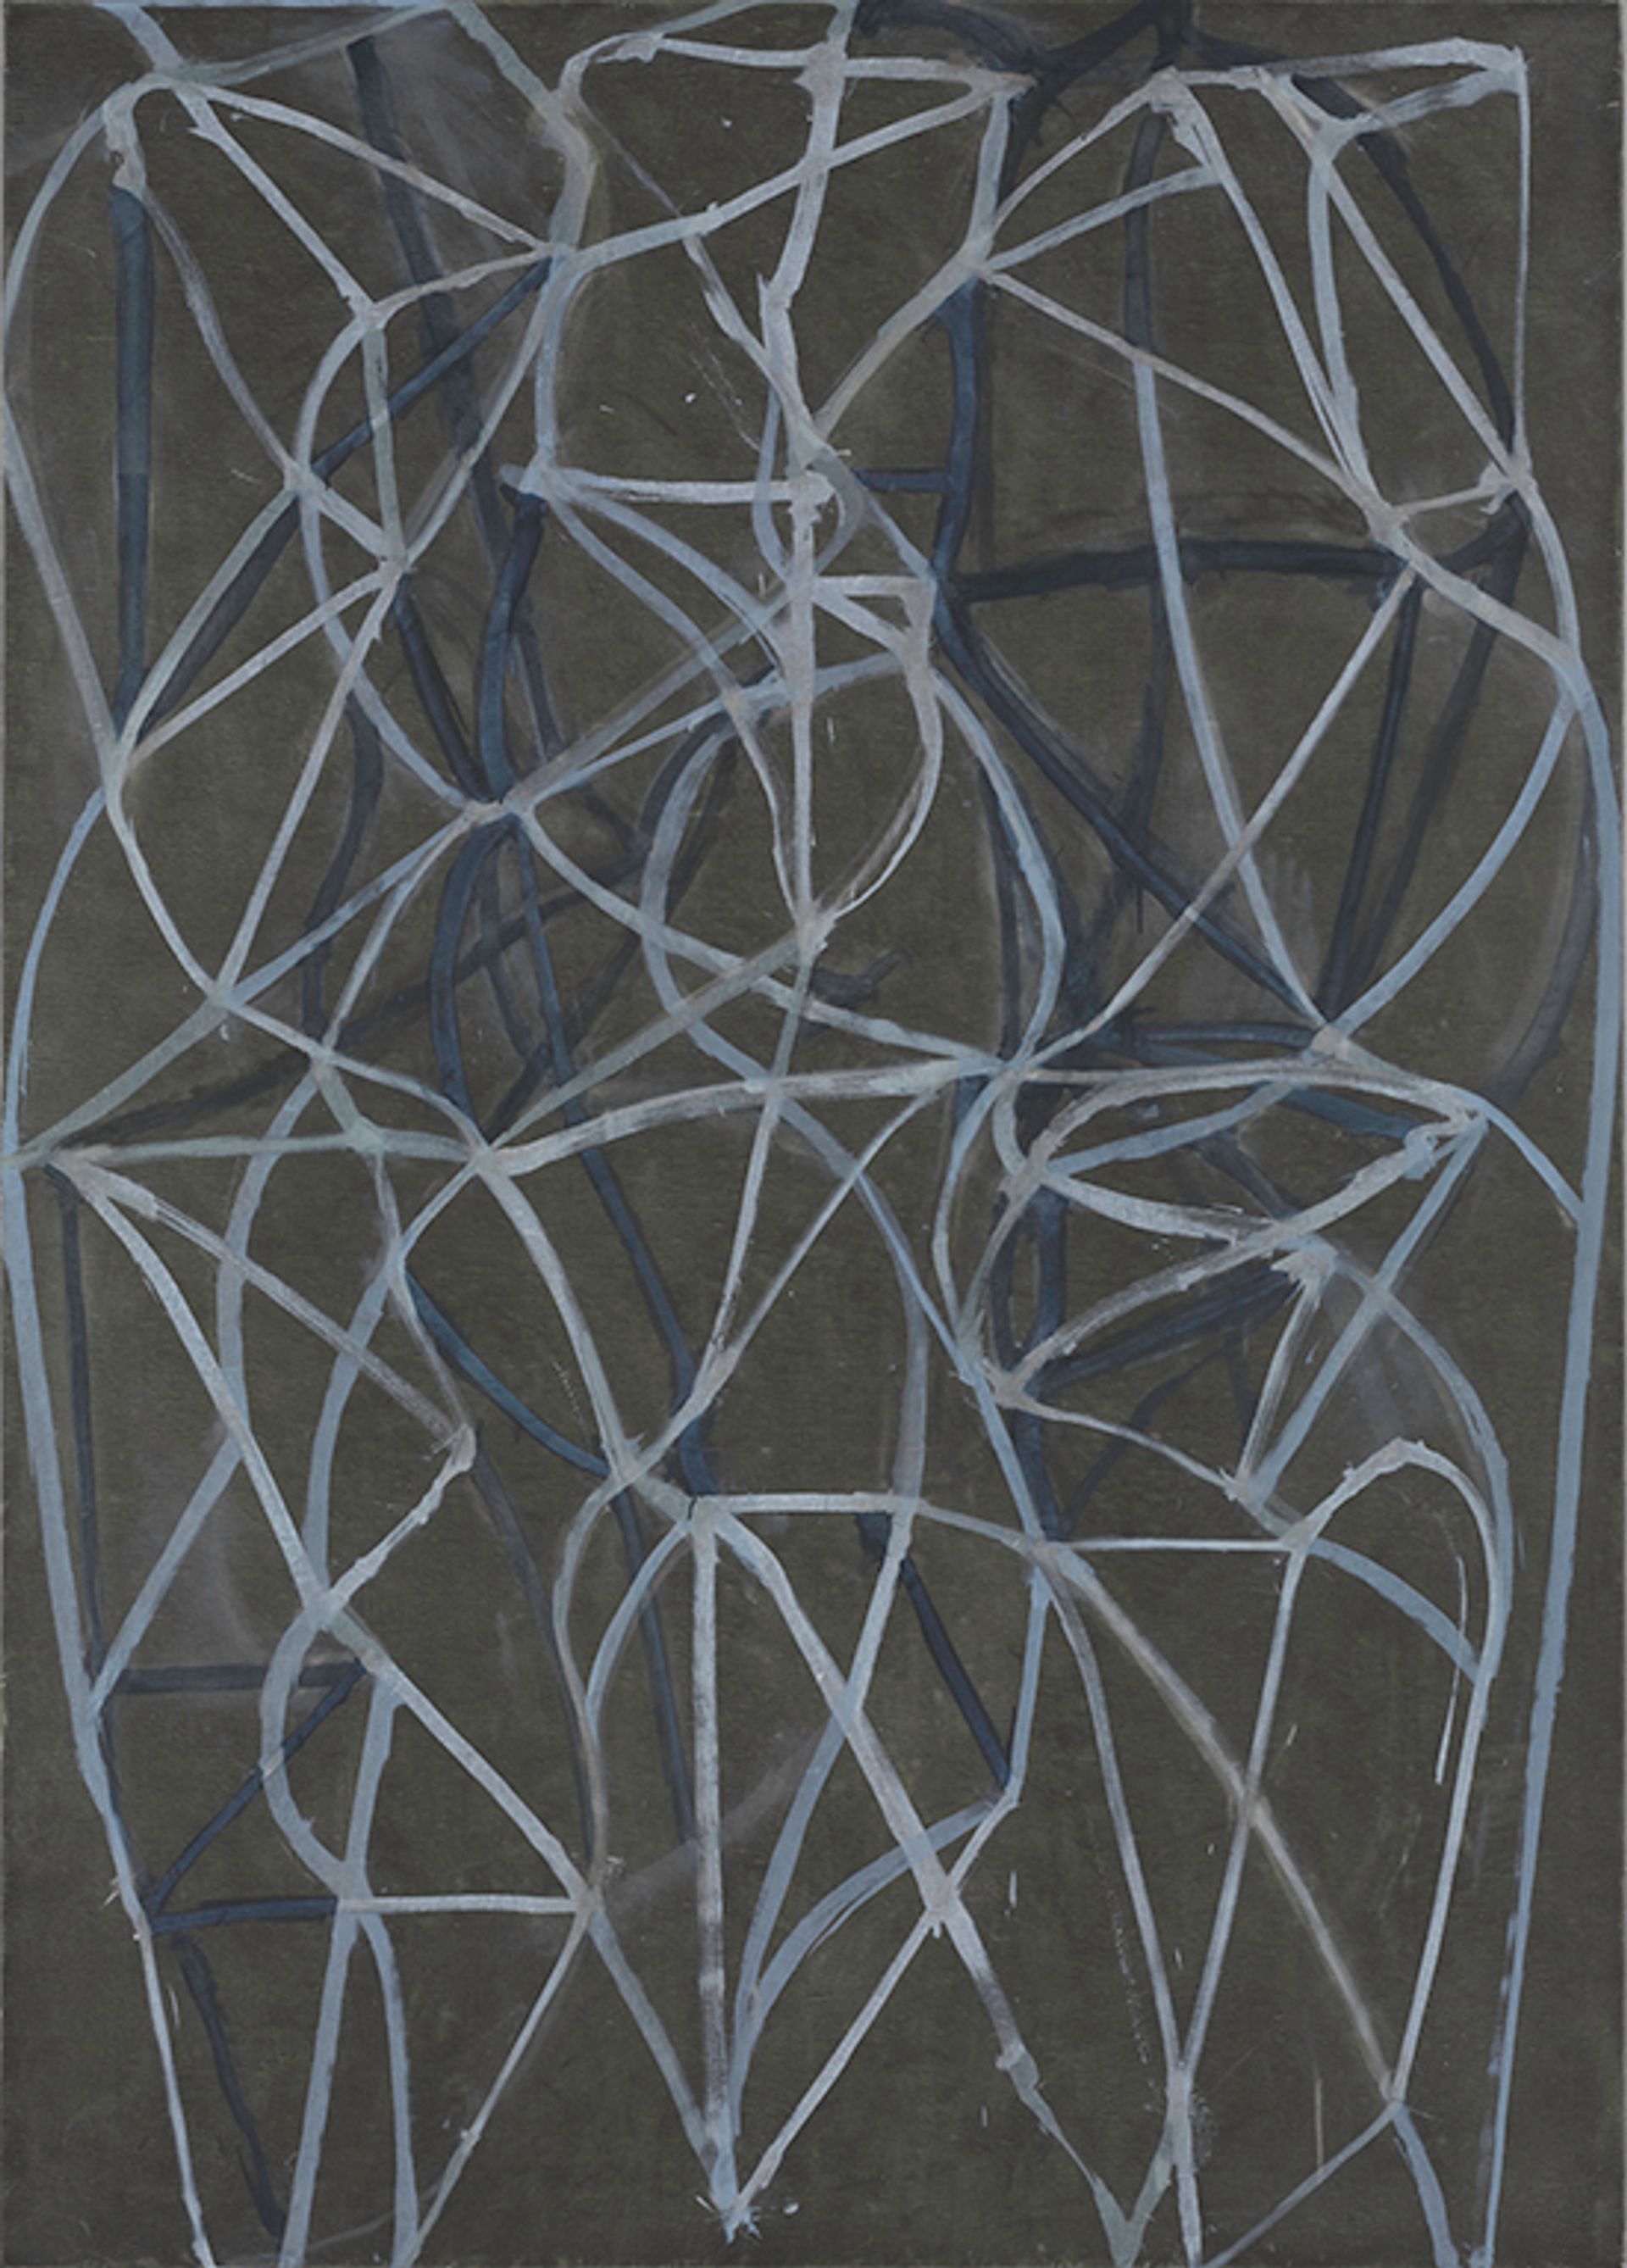 Brice Marden, 3 (1987-88), which is to be auctioned at Sotheby's Courtesy of the Baltimore Museum of Art